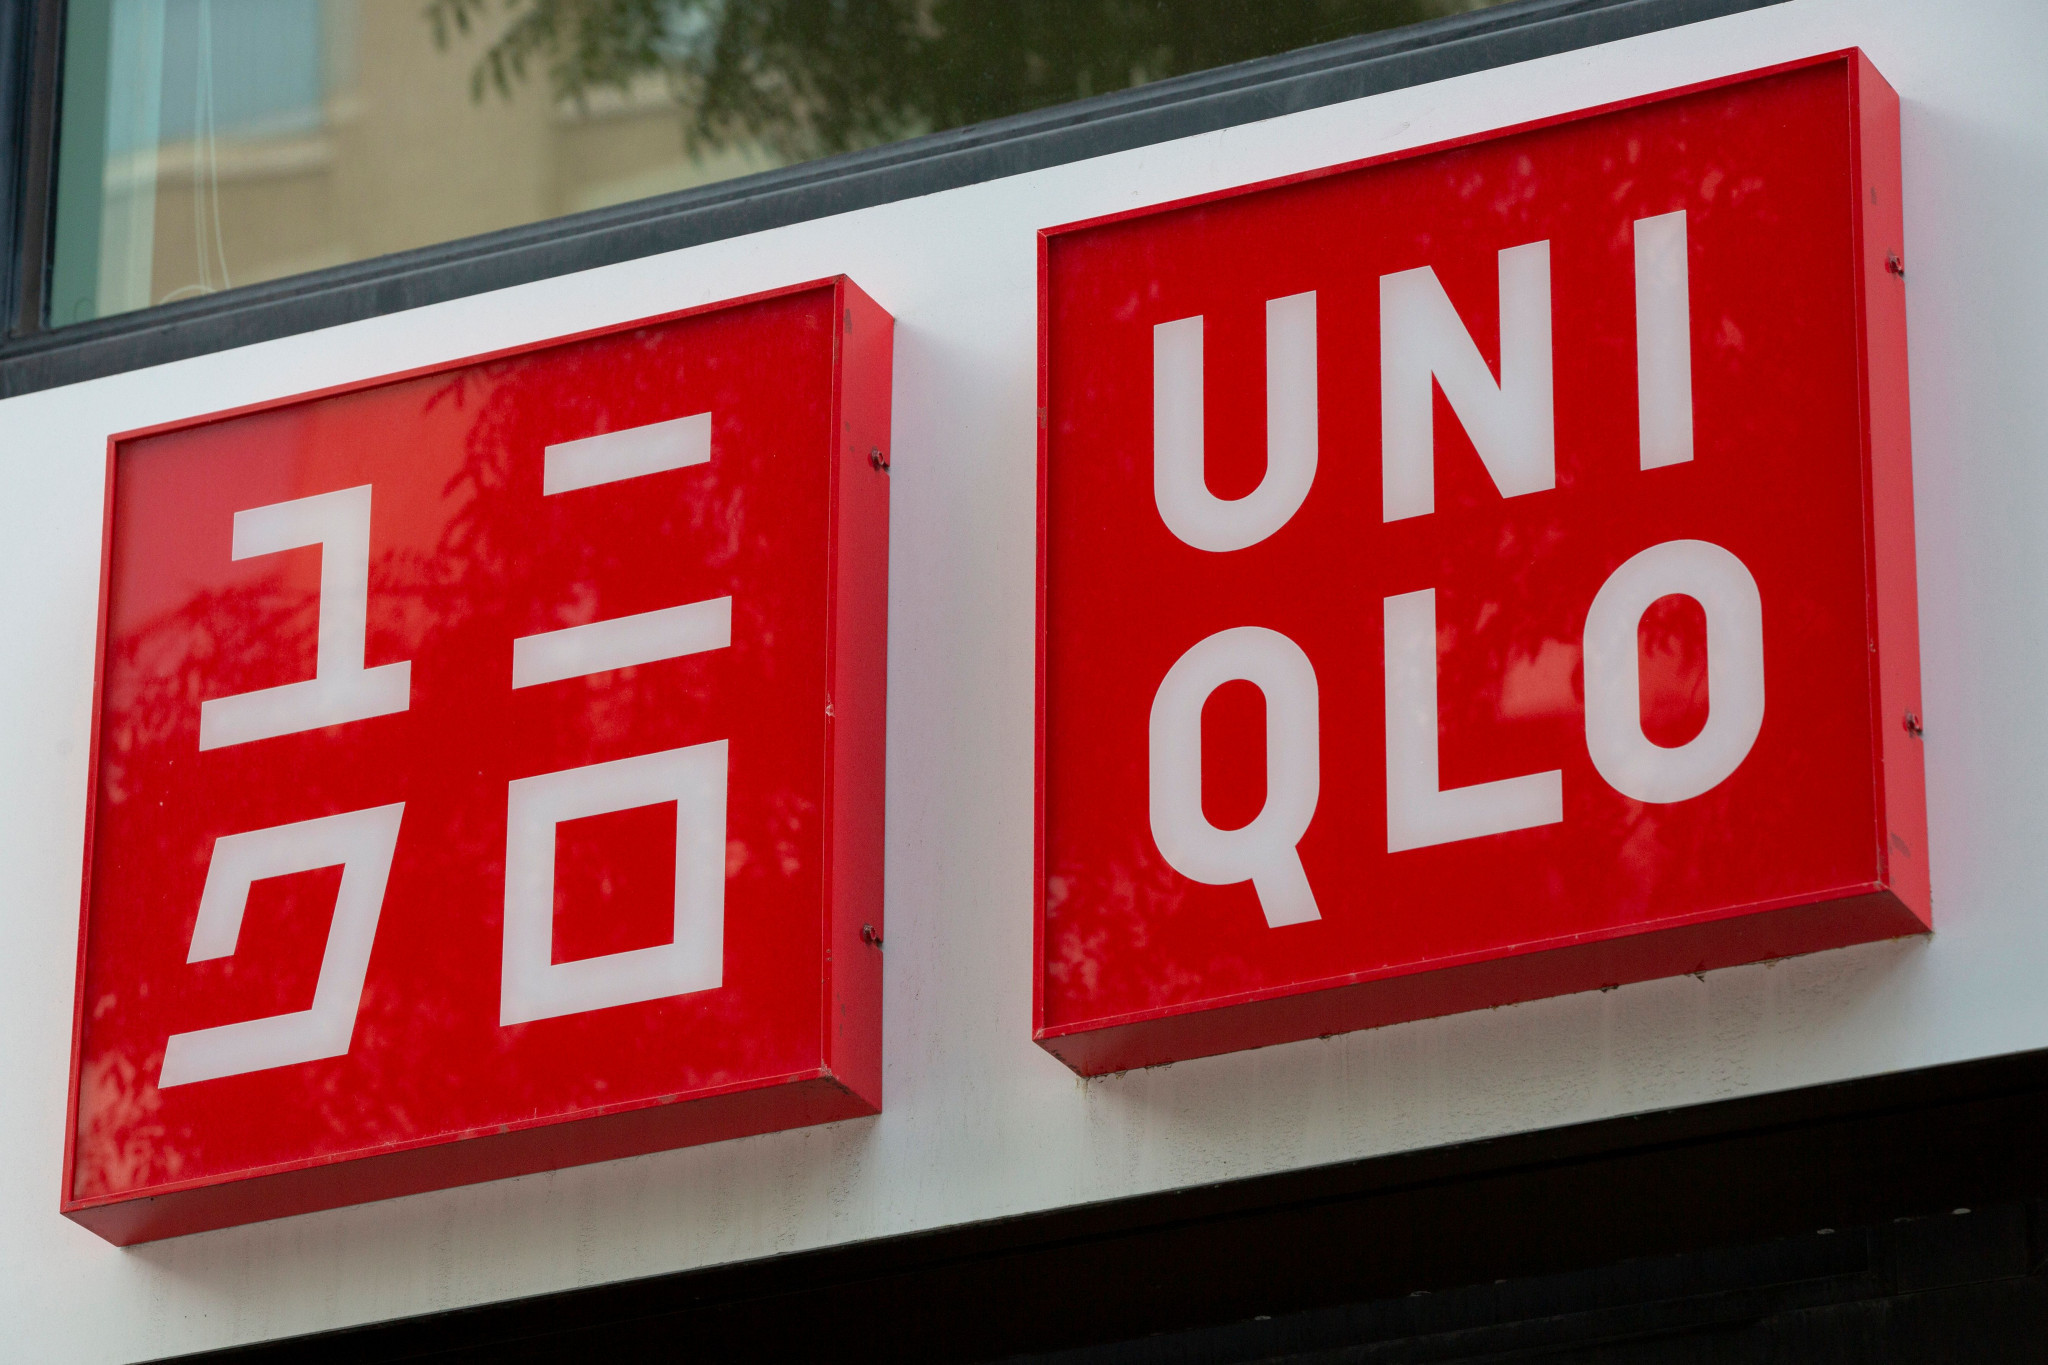 Japanese fashion brand UNIQLO, which has served as title sponsor of the Wheelchair Tennis Tour since 2014, has extended its deal for a further three years ©Getty Images